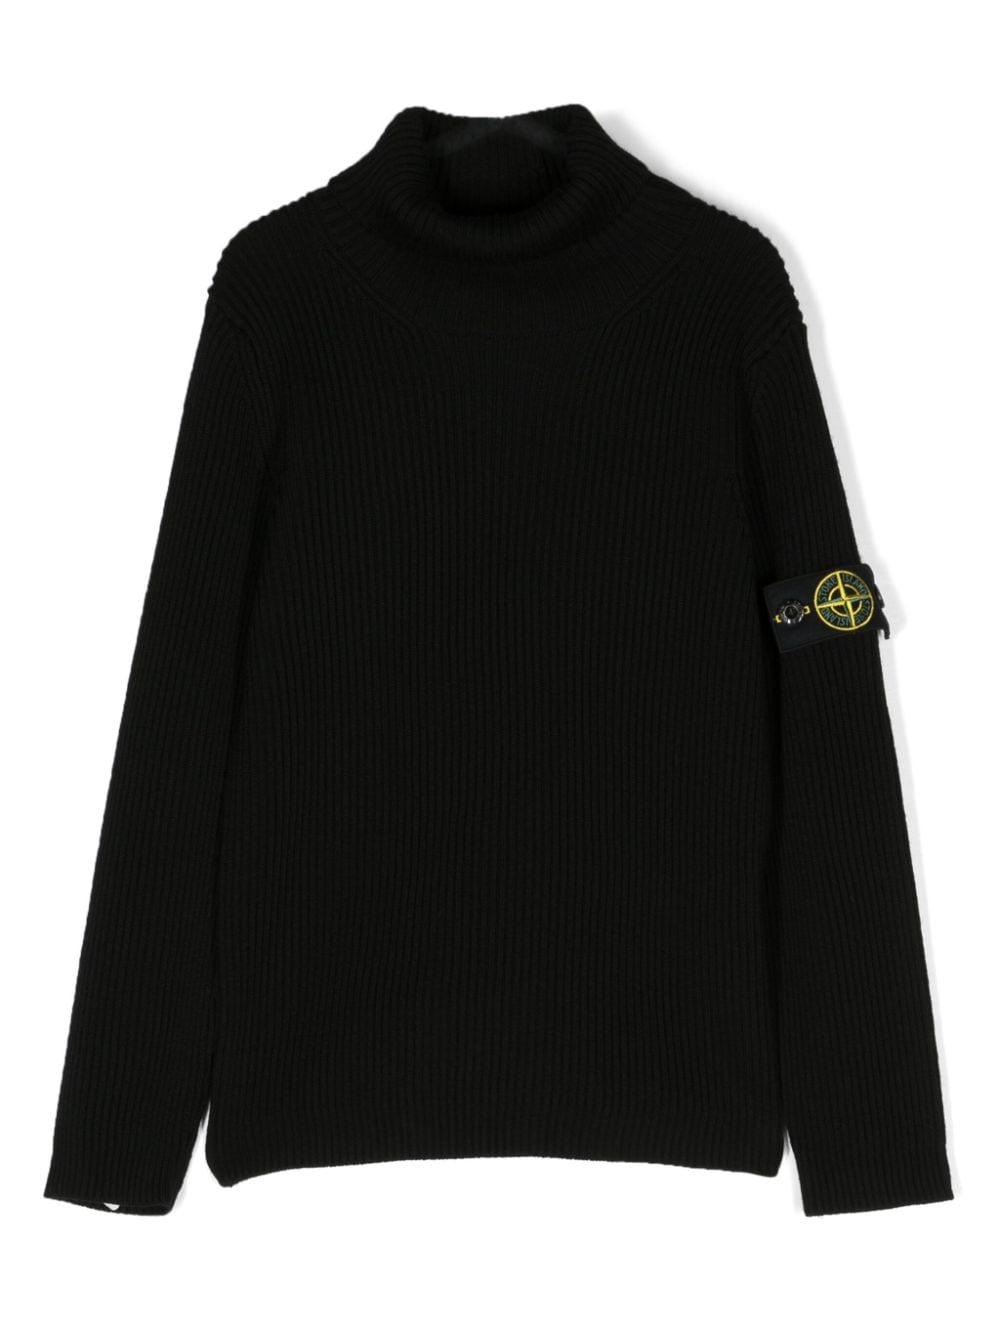 Black sweater for boys with logo